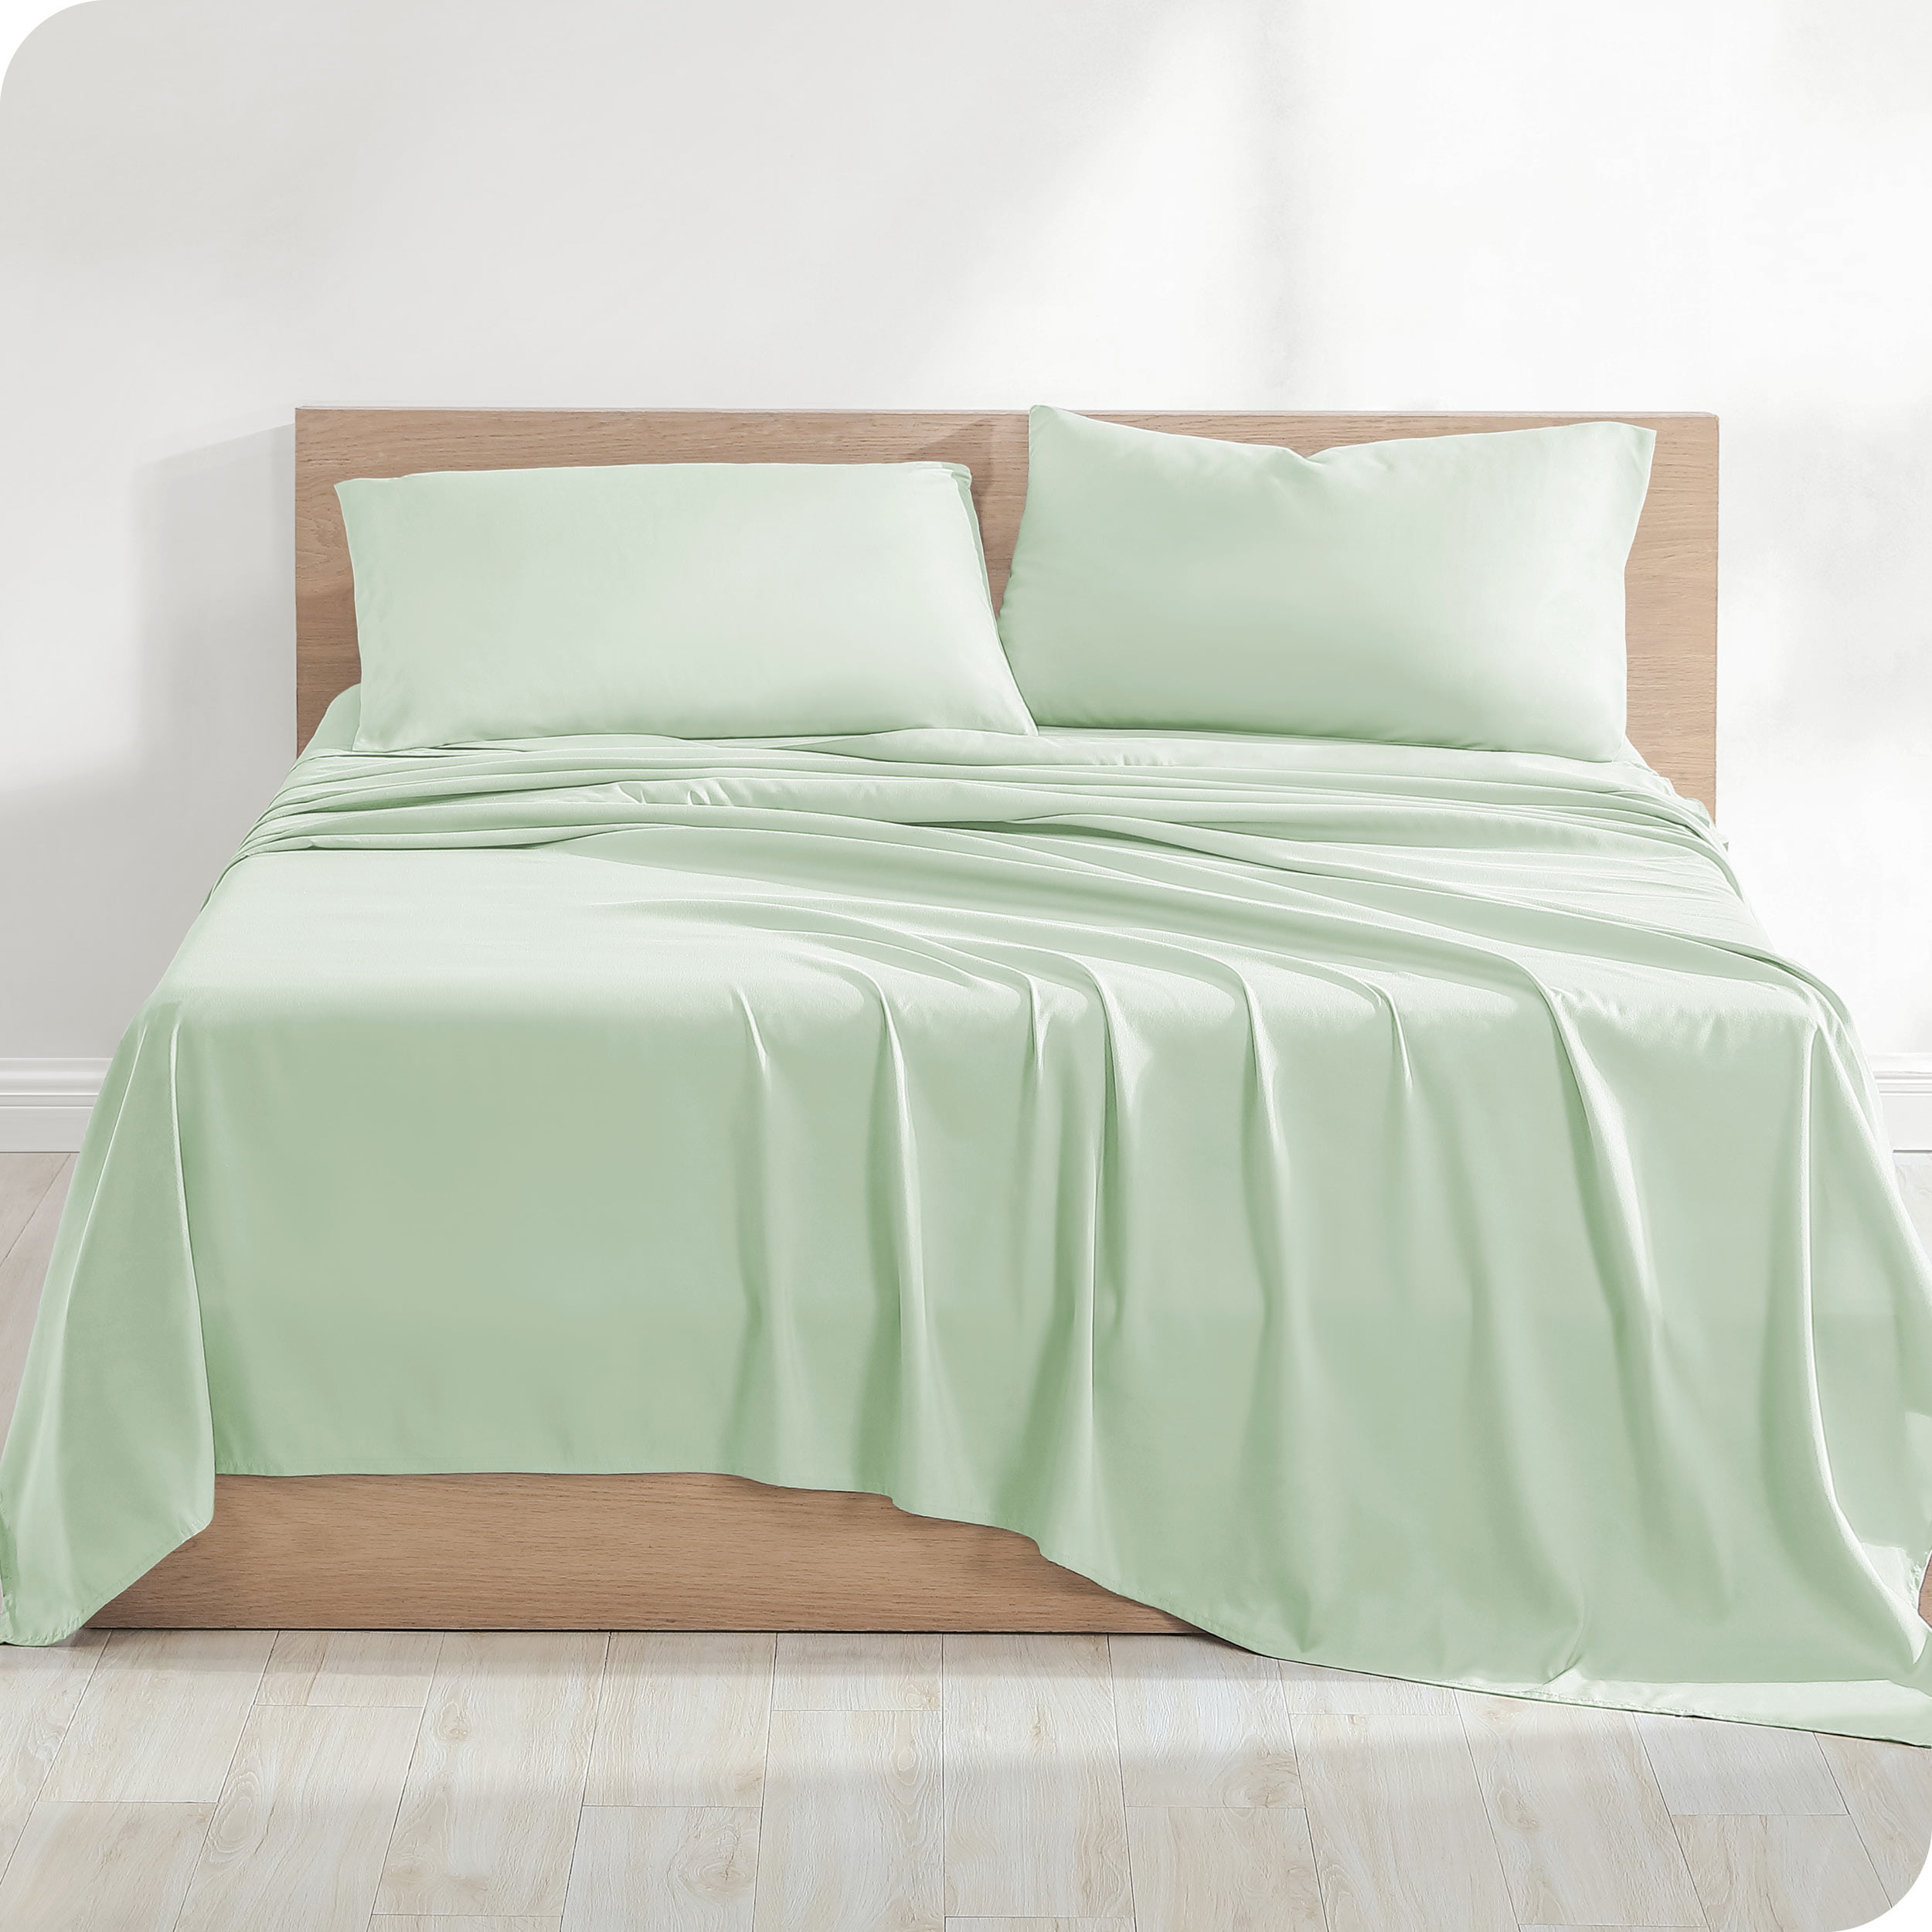 Flat Sheet & Pillow Case UK Sizes 1000  Thread Count Organic Cotton Solid Colors 